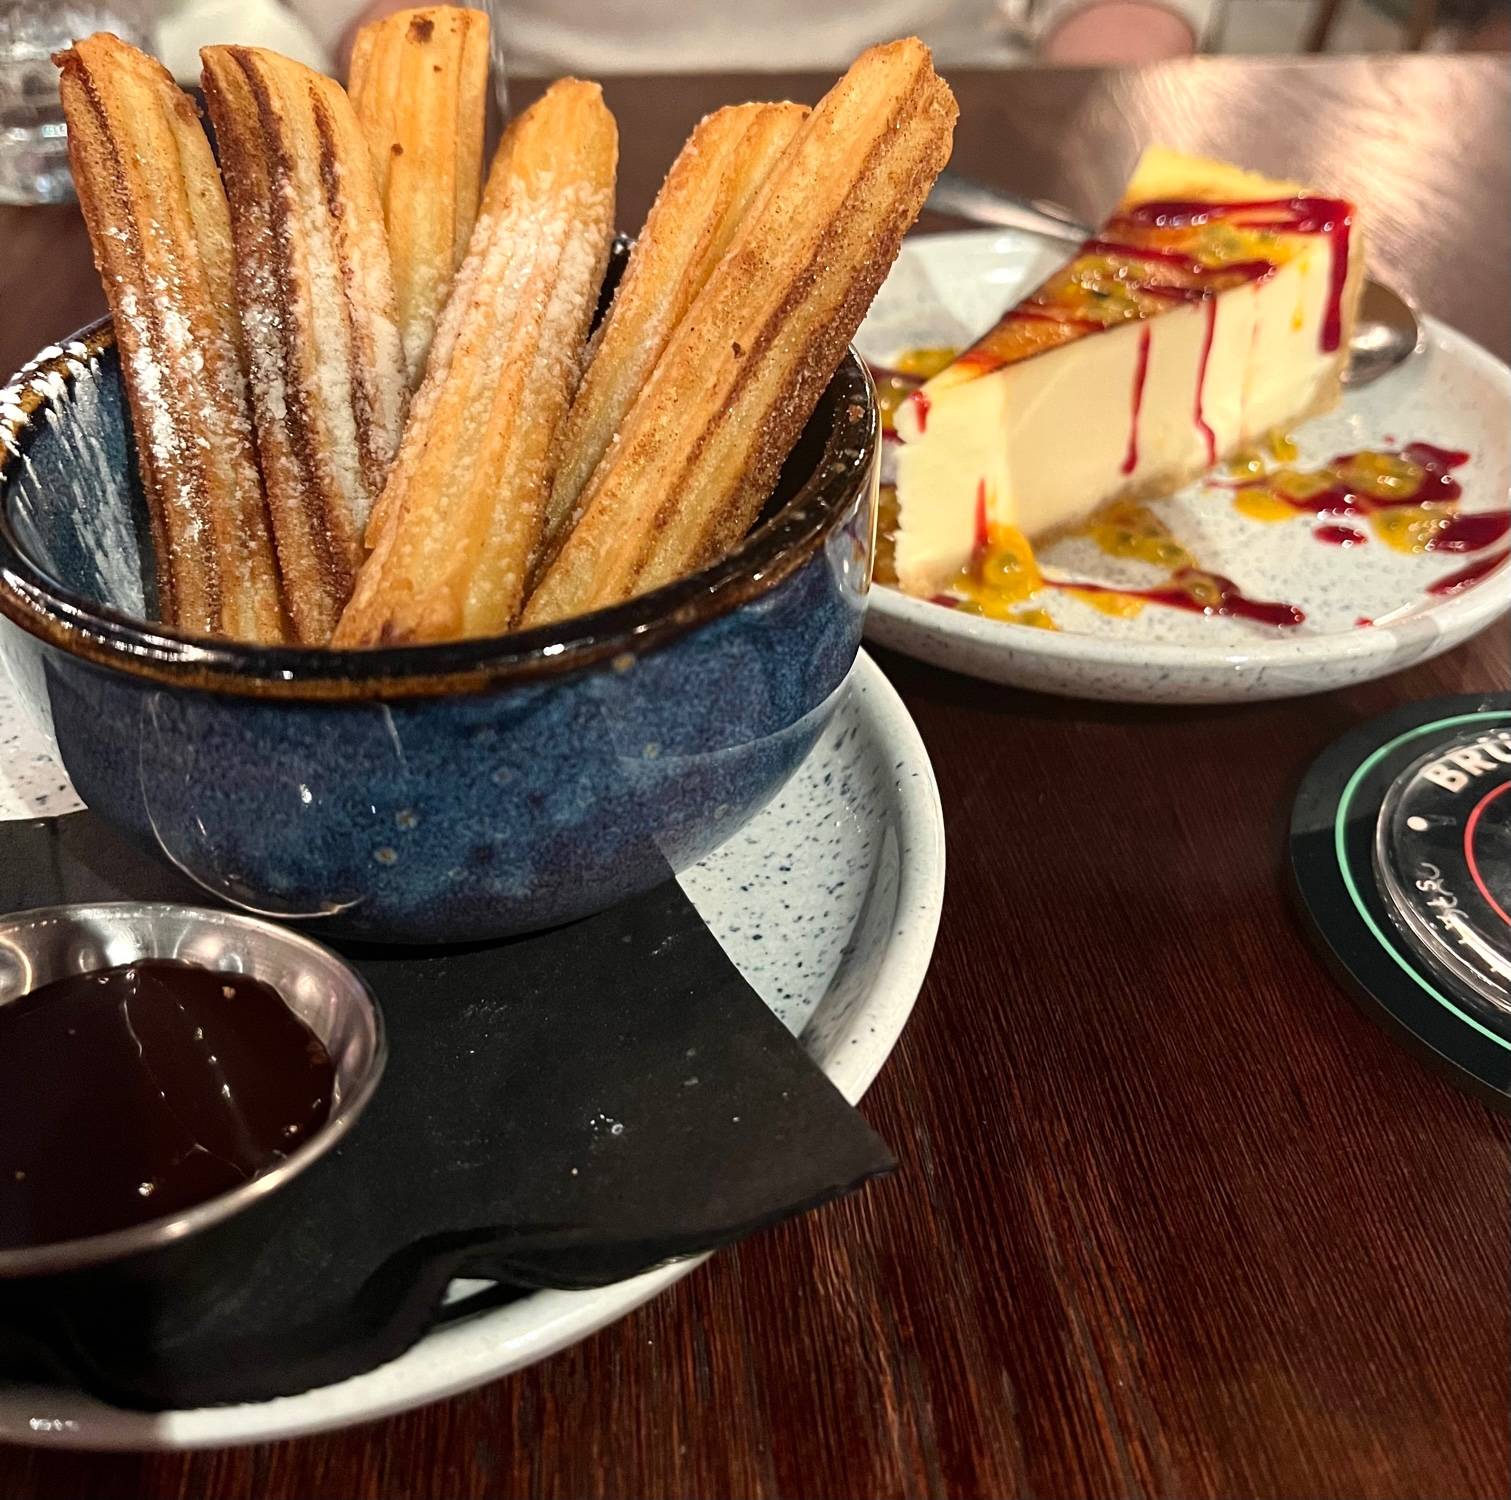 churros and cheesecake on blue plates